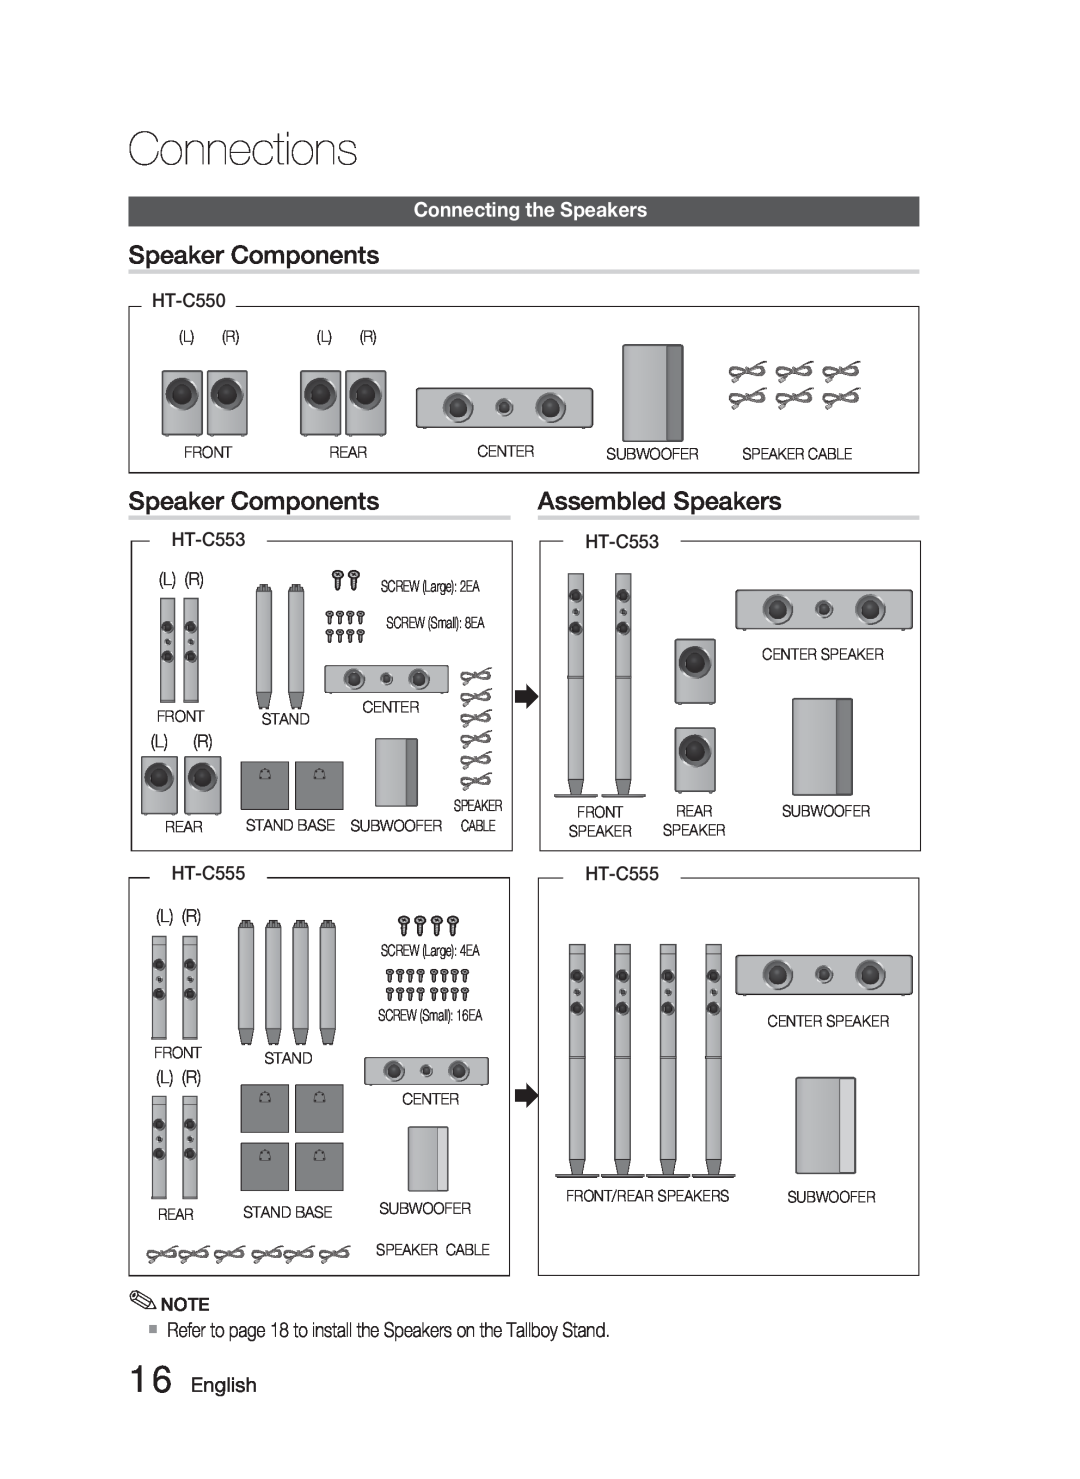 Samsung HT-C550-XAC user manual Speaker Components, Assembled Speakers, English, Connections, Connecting the Speakers 